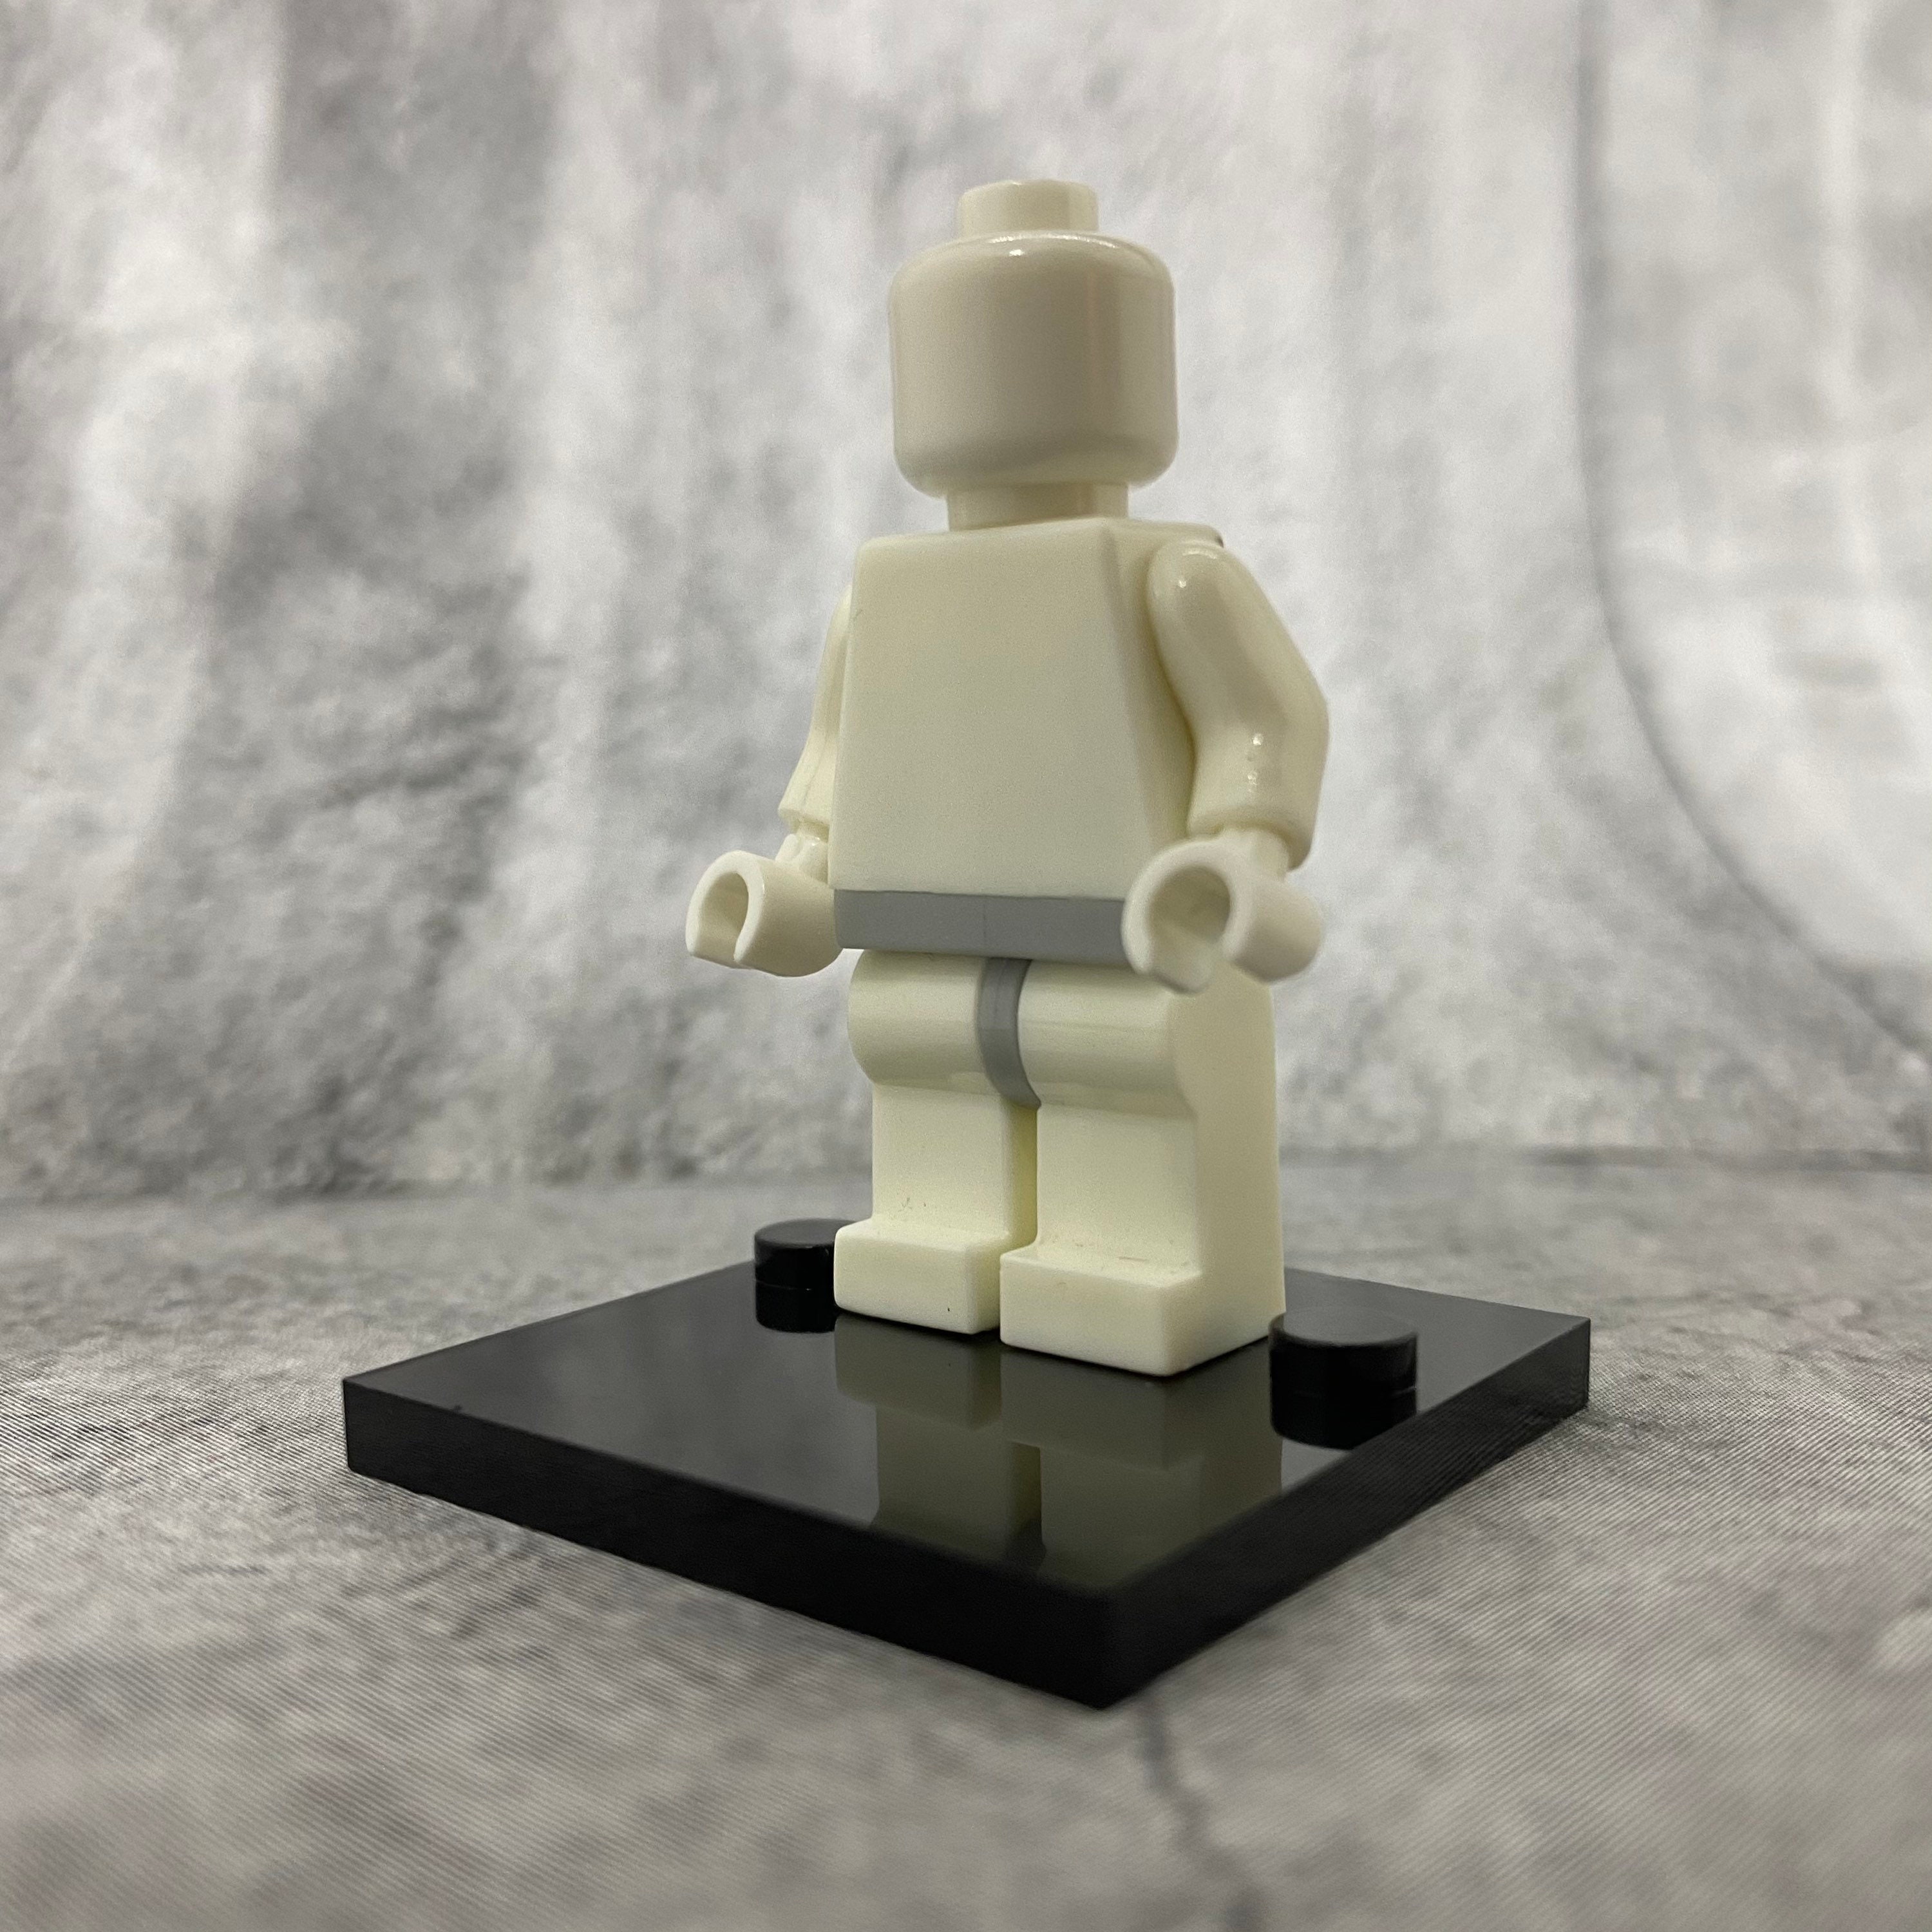 Details about   LOT OF 20 MINIFIGURE DISPLAY PLATE STANDS 3x4 or 4x4 with 1x4 STUDS 